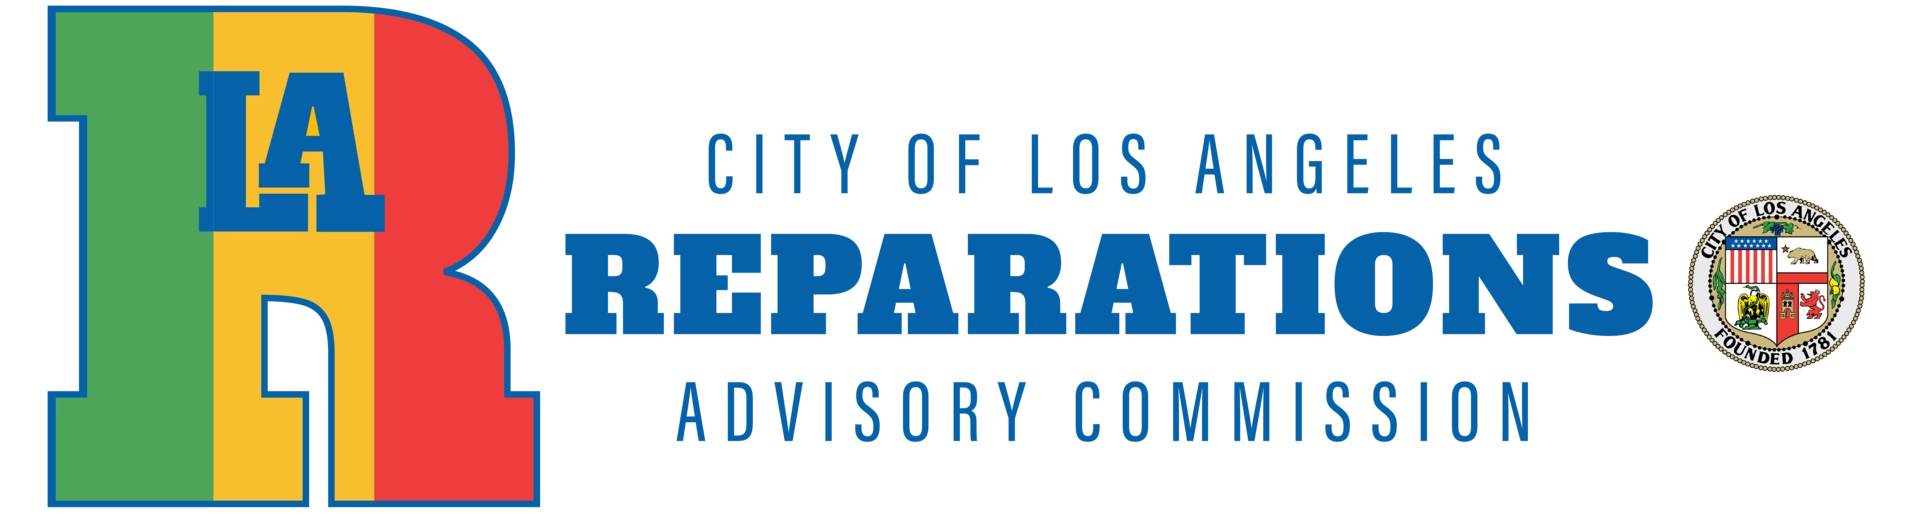 City of Los Angeles Reparations Advisory Commission Logo